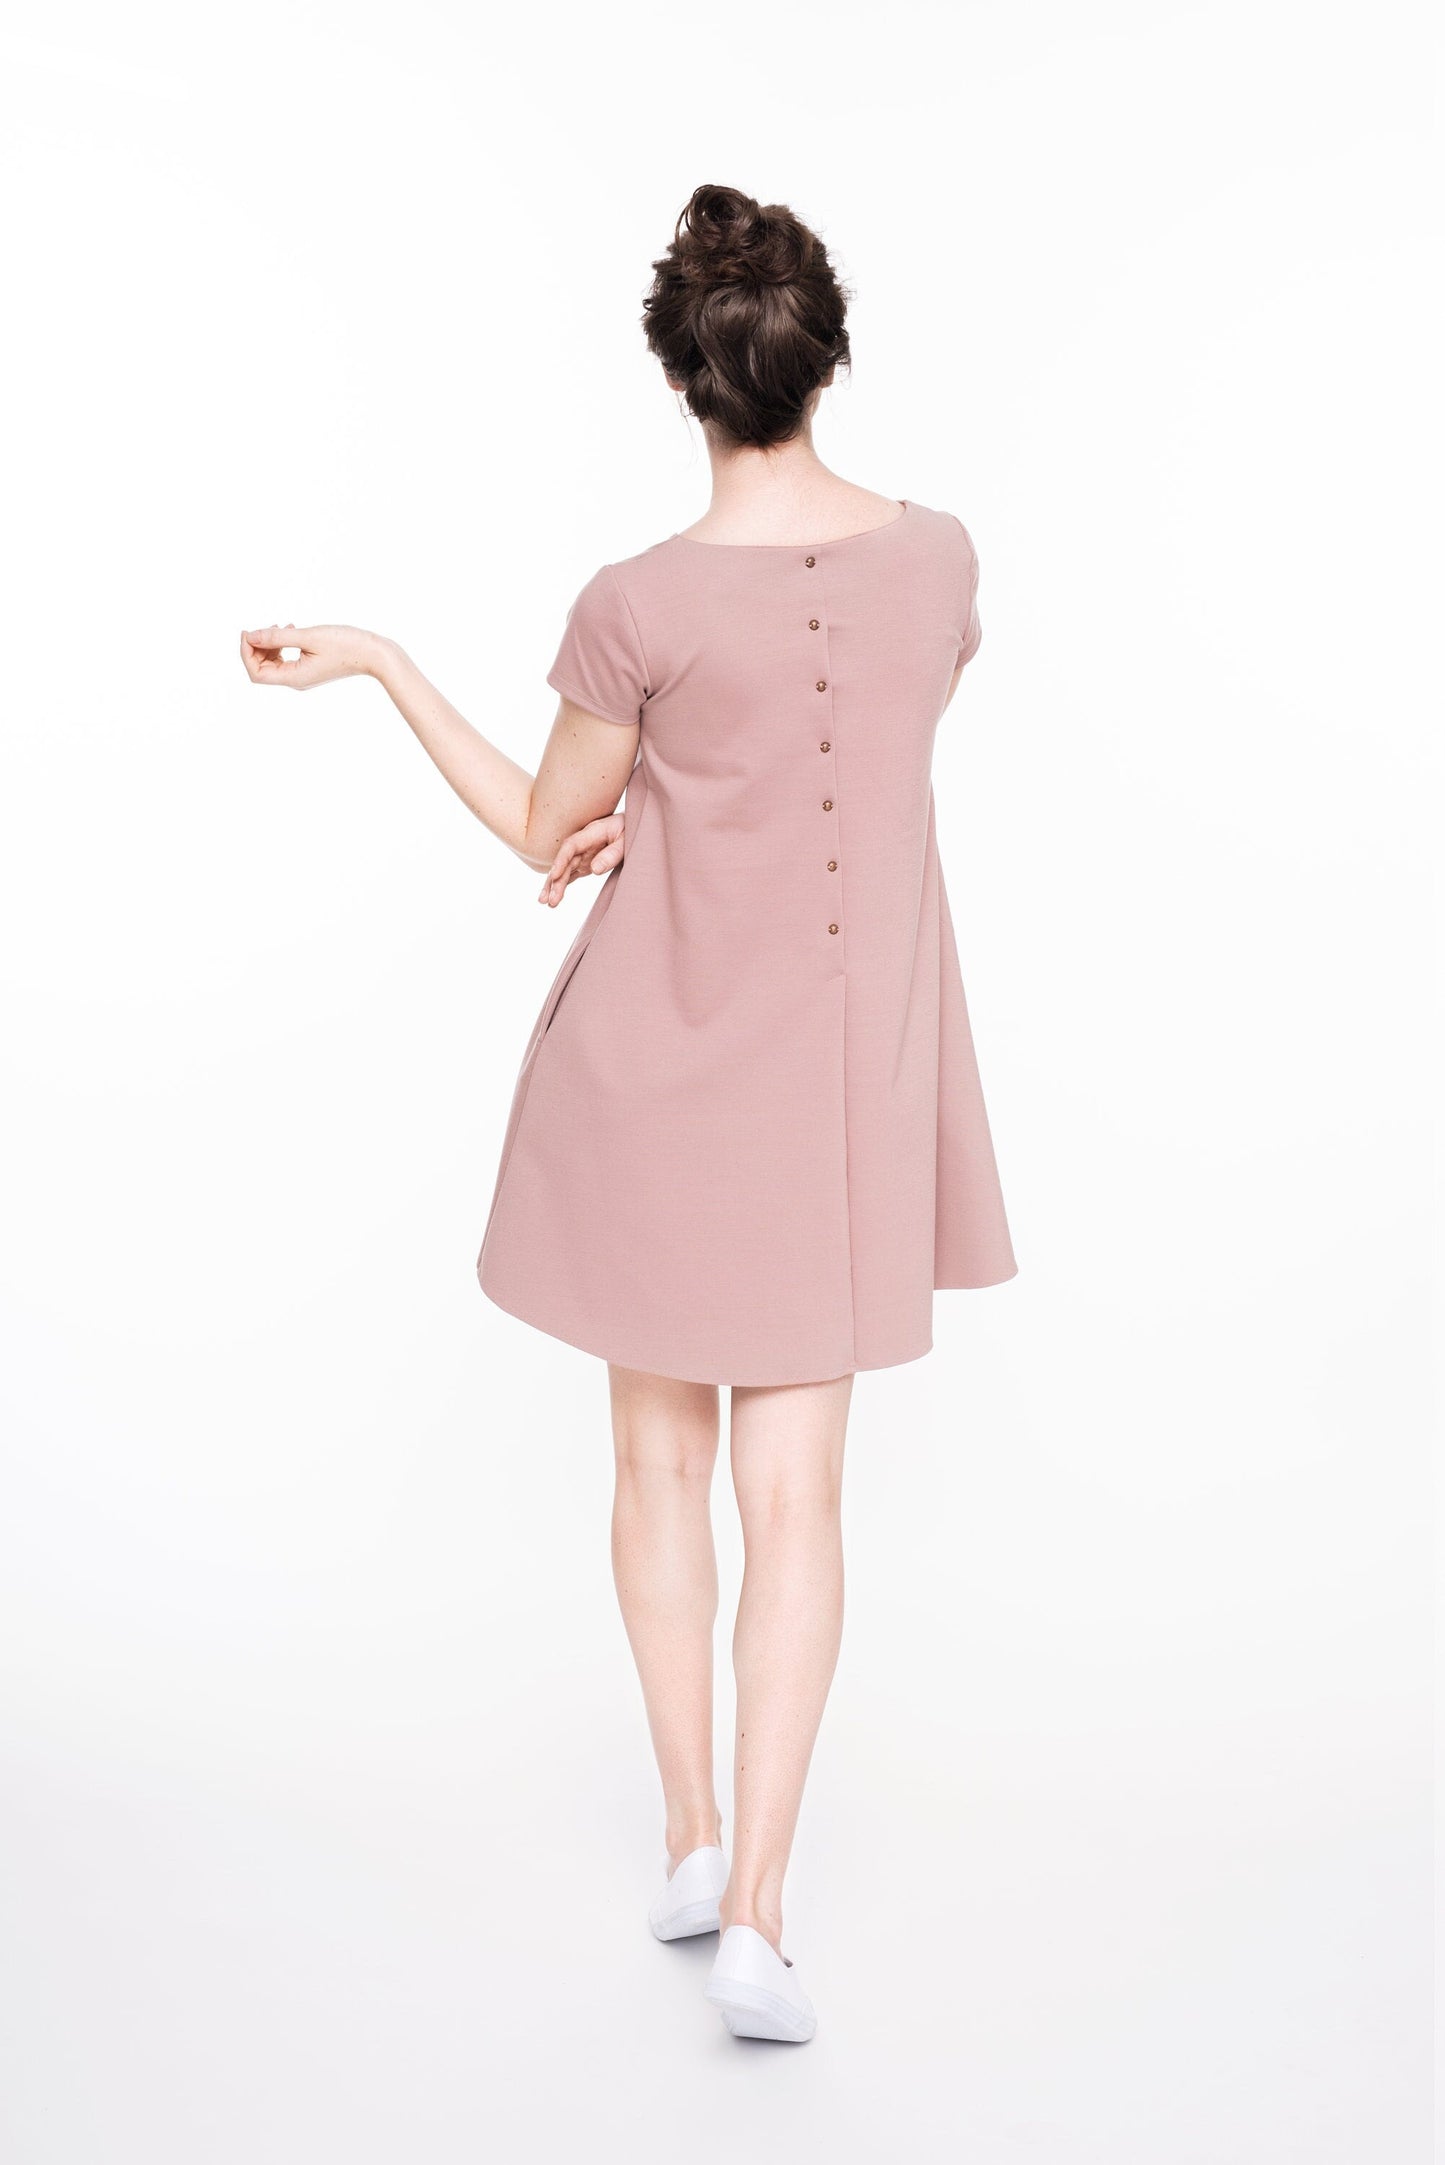 LeMuse SUMMER CALMNESS dress with buttons, Dusty rose, S